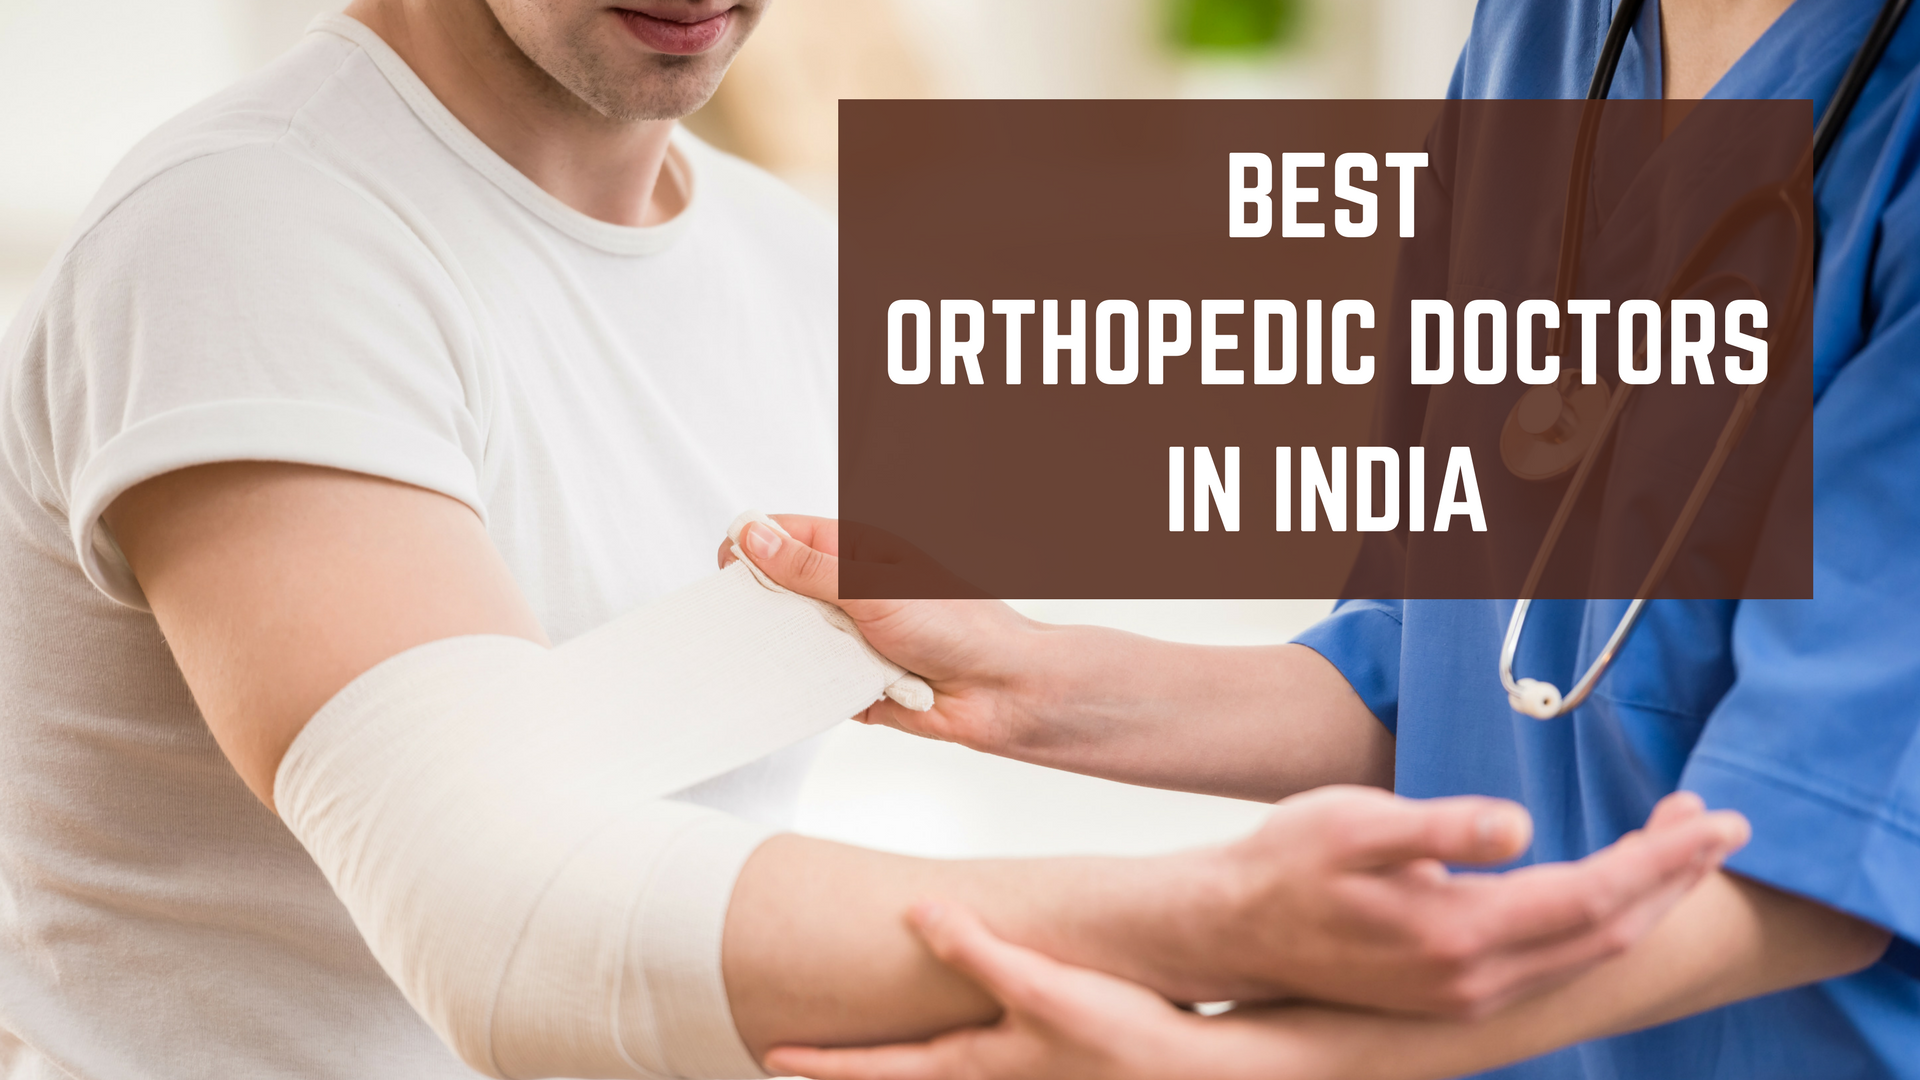 Who is the top 1 orthopedic doctor in India?